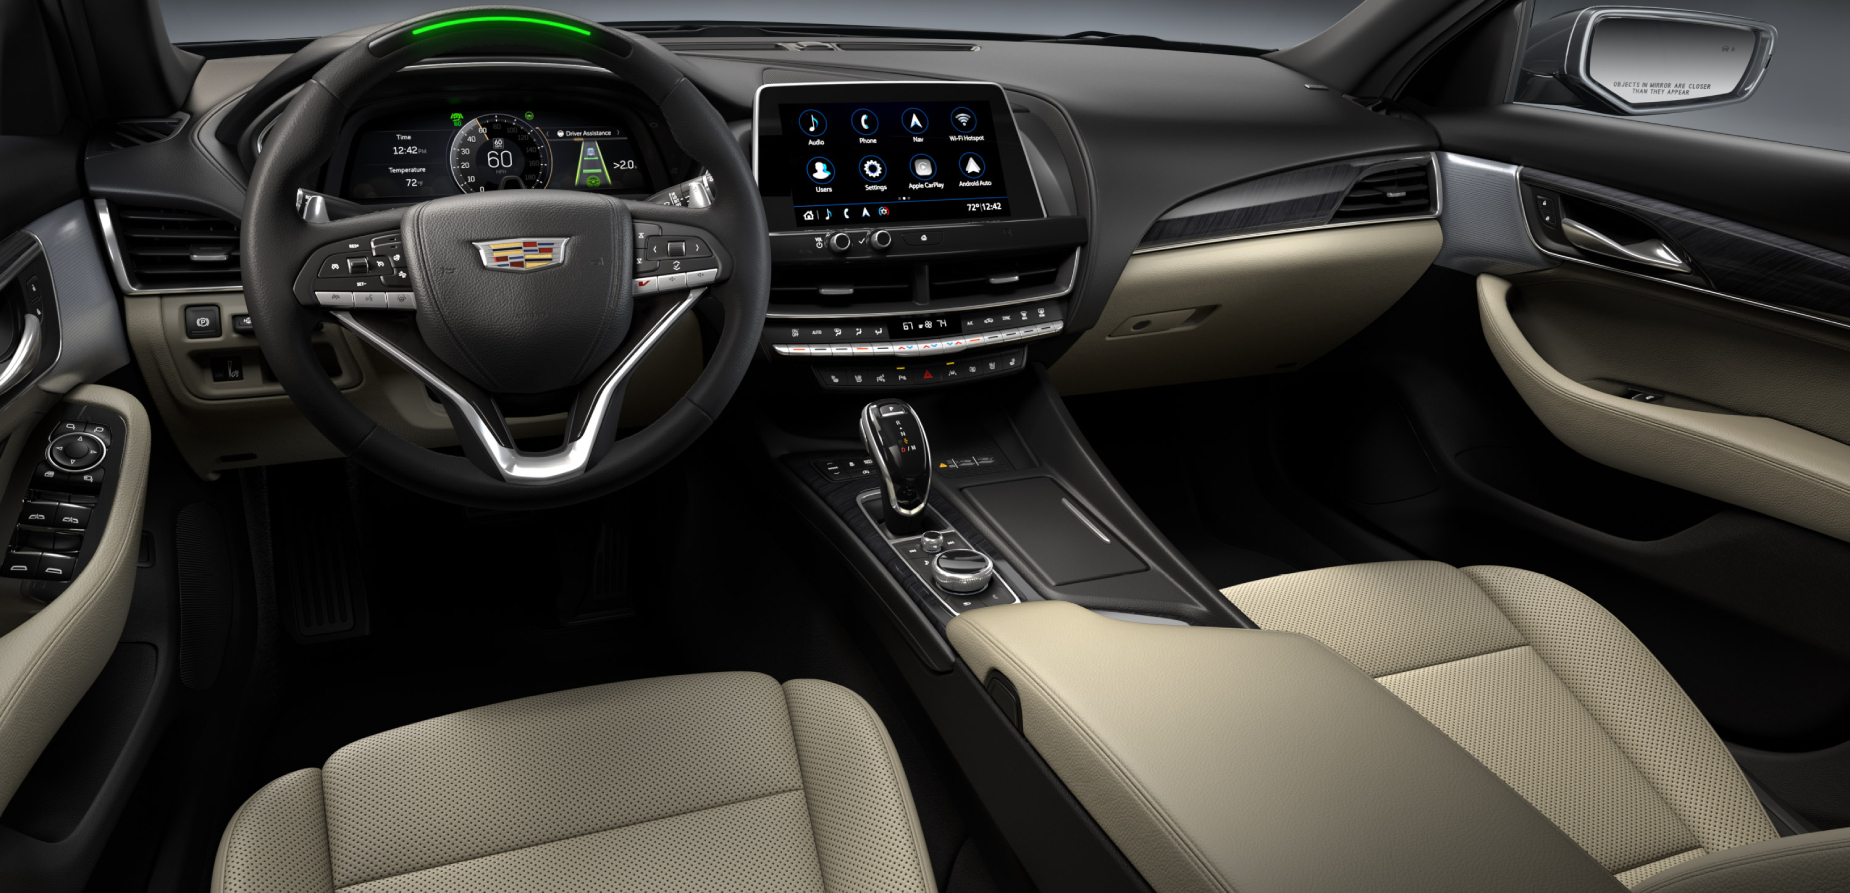 A look into the interior of the 2021 Cadillac CT5-V, which features wireless Apple CarPlay and Android Auto